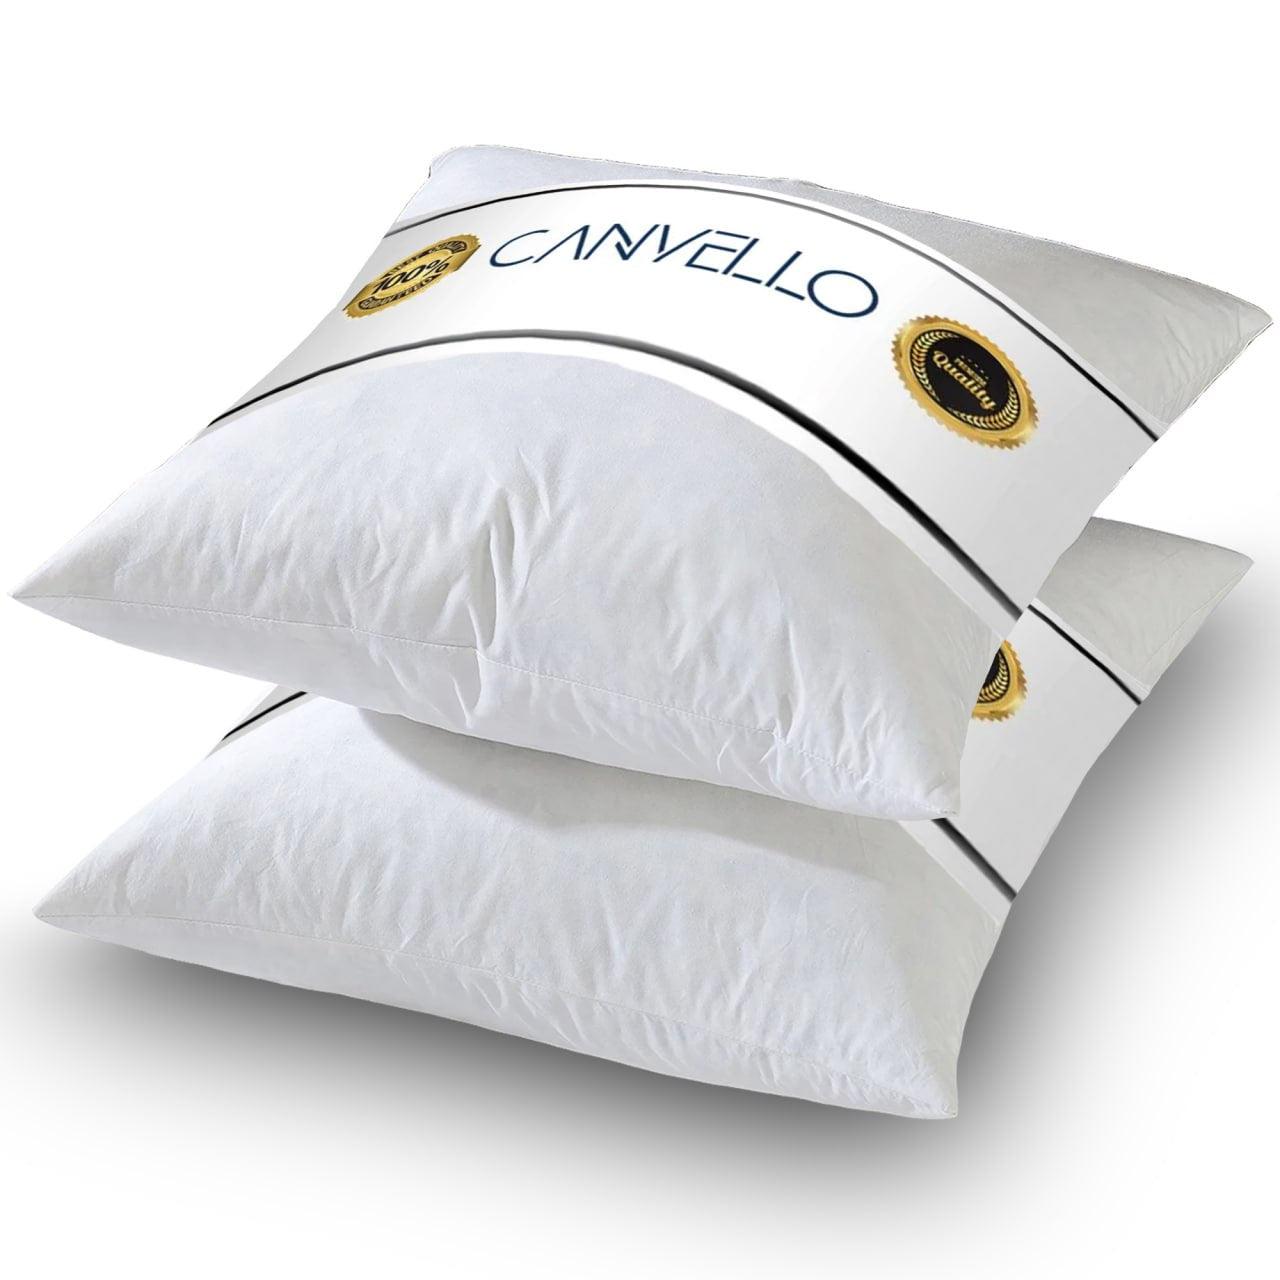 https://canvellostudio.com/cdn/shop/files/canvello-decorative-pillow-inserts-throw-pillow-insert-down-feather-fill-for-extra-fluff-with-233-thread-count-100percent-cotton-cover-quality-checked-in-u-s-a-canvello-17_243e75da-287e-44c3-a06c-bb54ab1c705f.jpg?v=1688097385